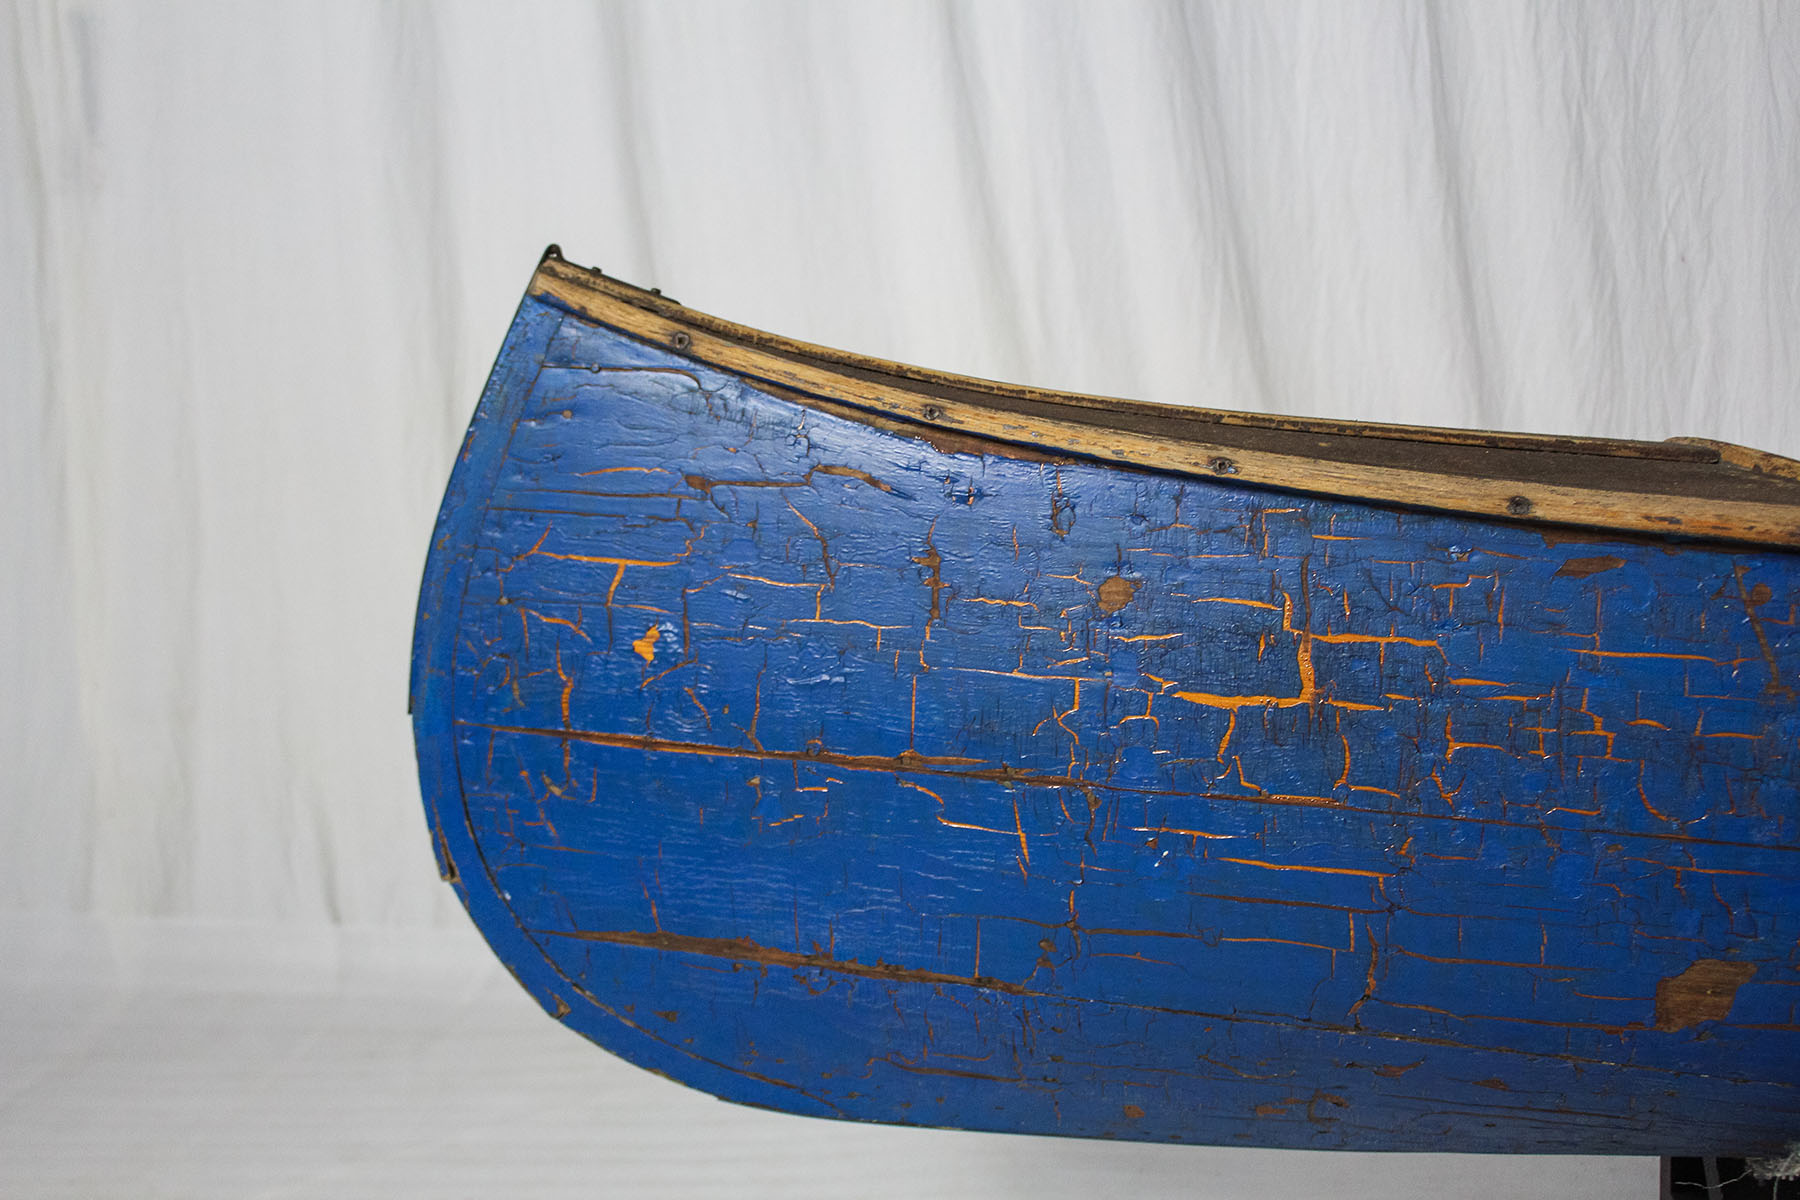 Cracked blue paint covers the stern of a wooden canoe in The Canadian Canoe Museum's collection.